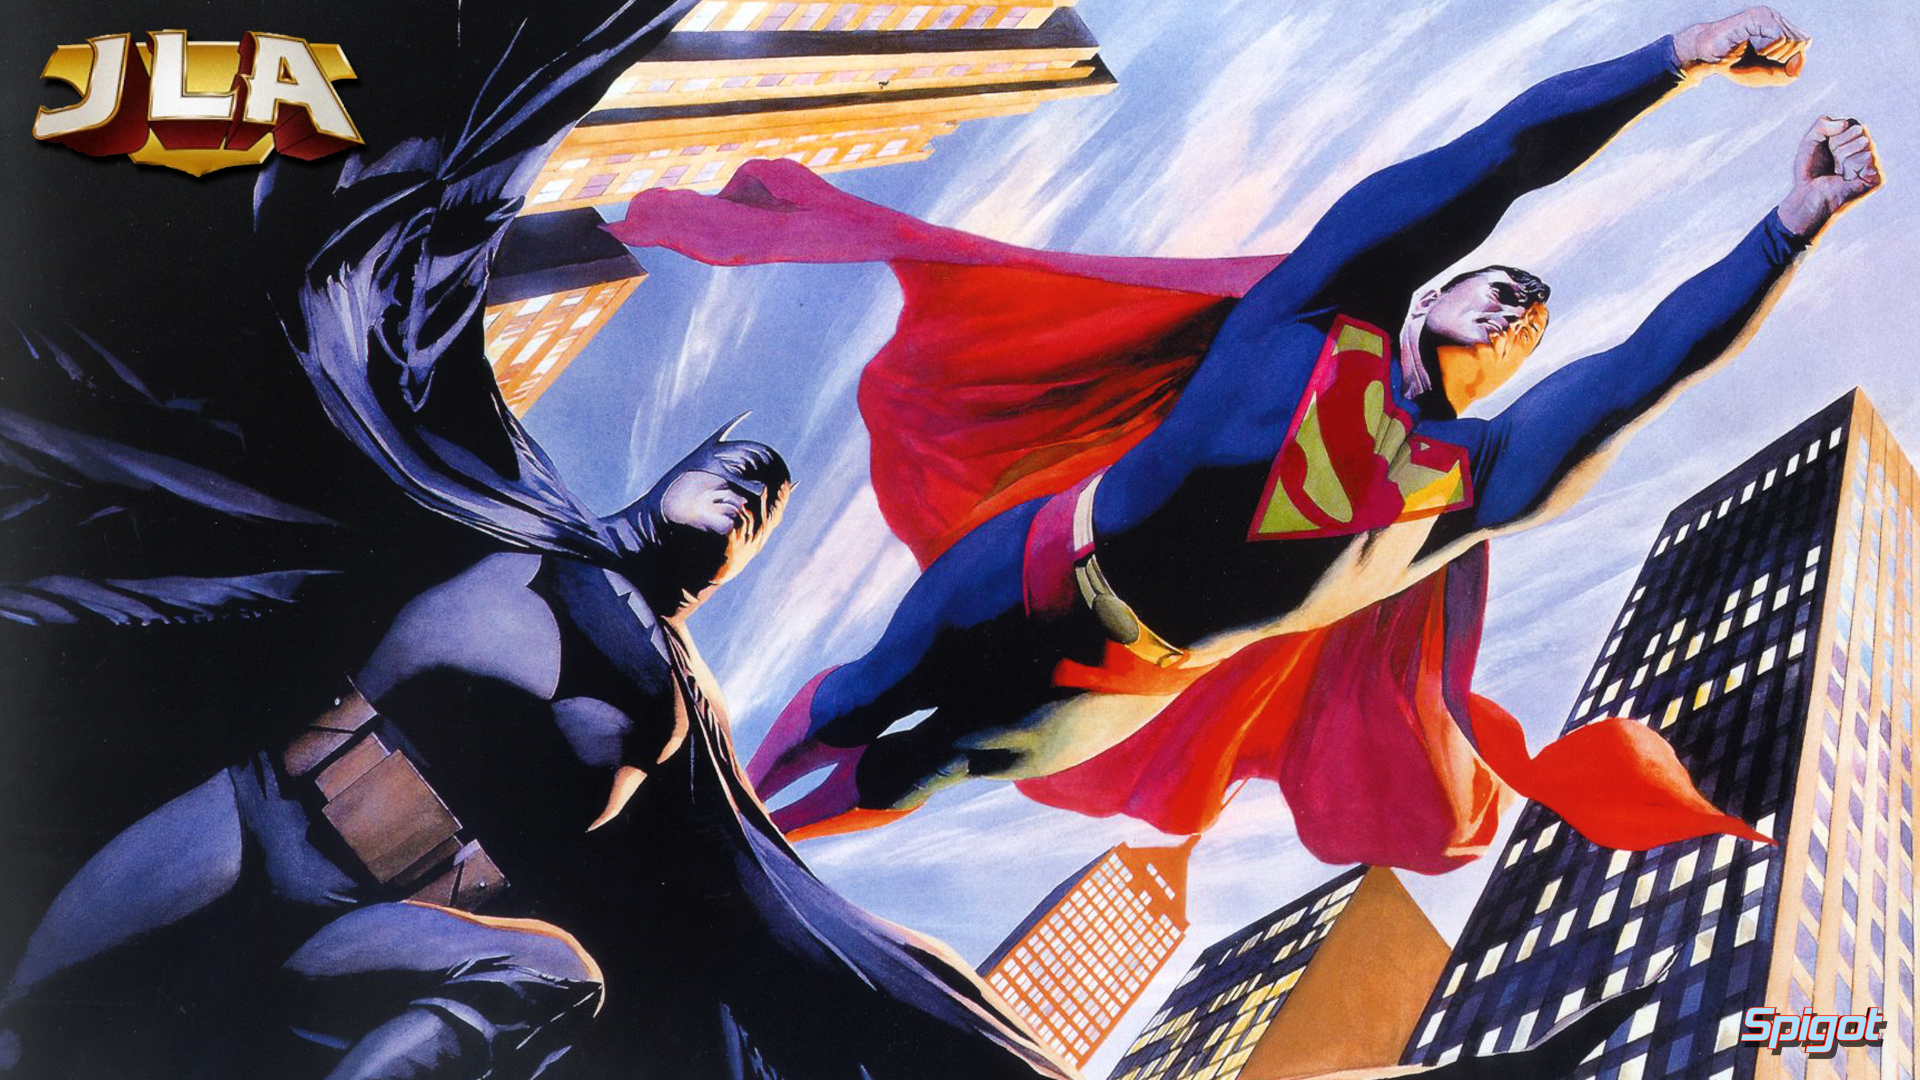 Yes more Justice League wallpapers from art by Alex Ross